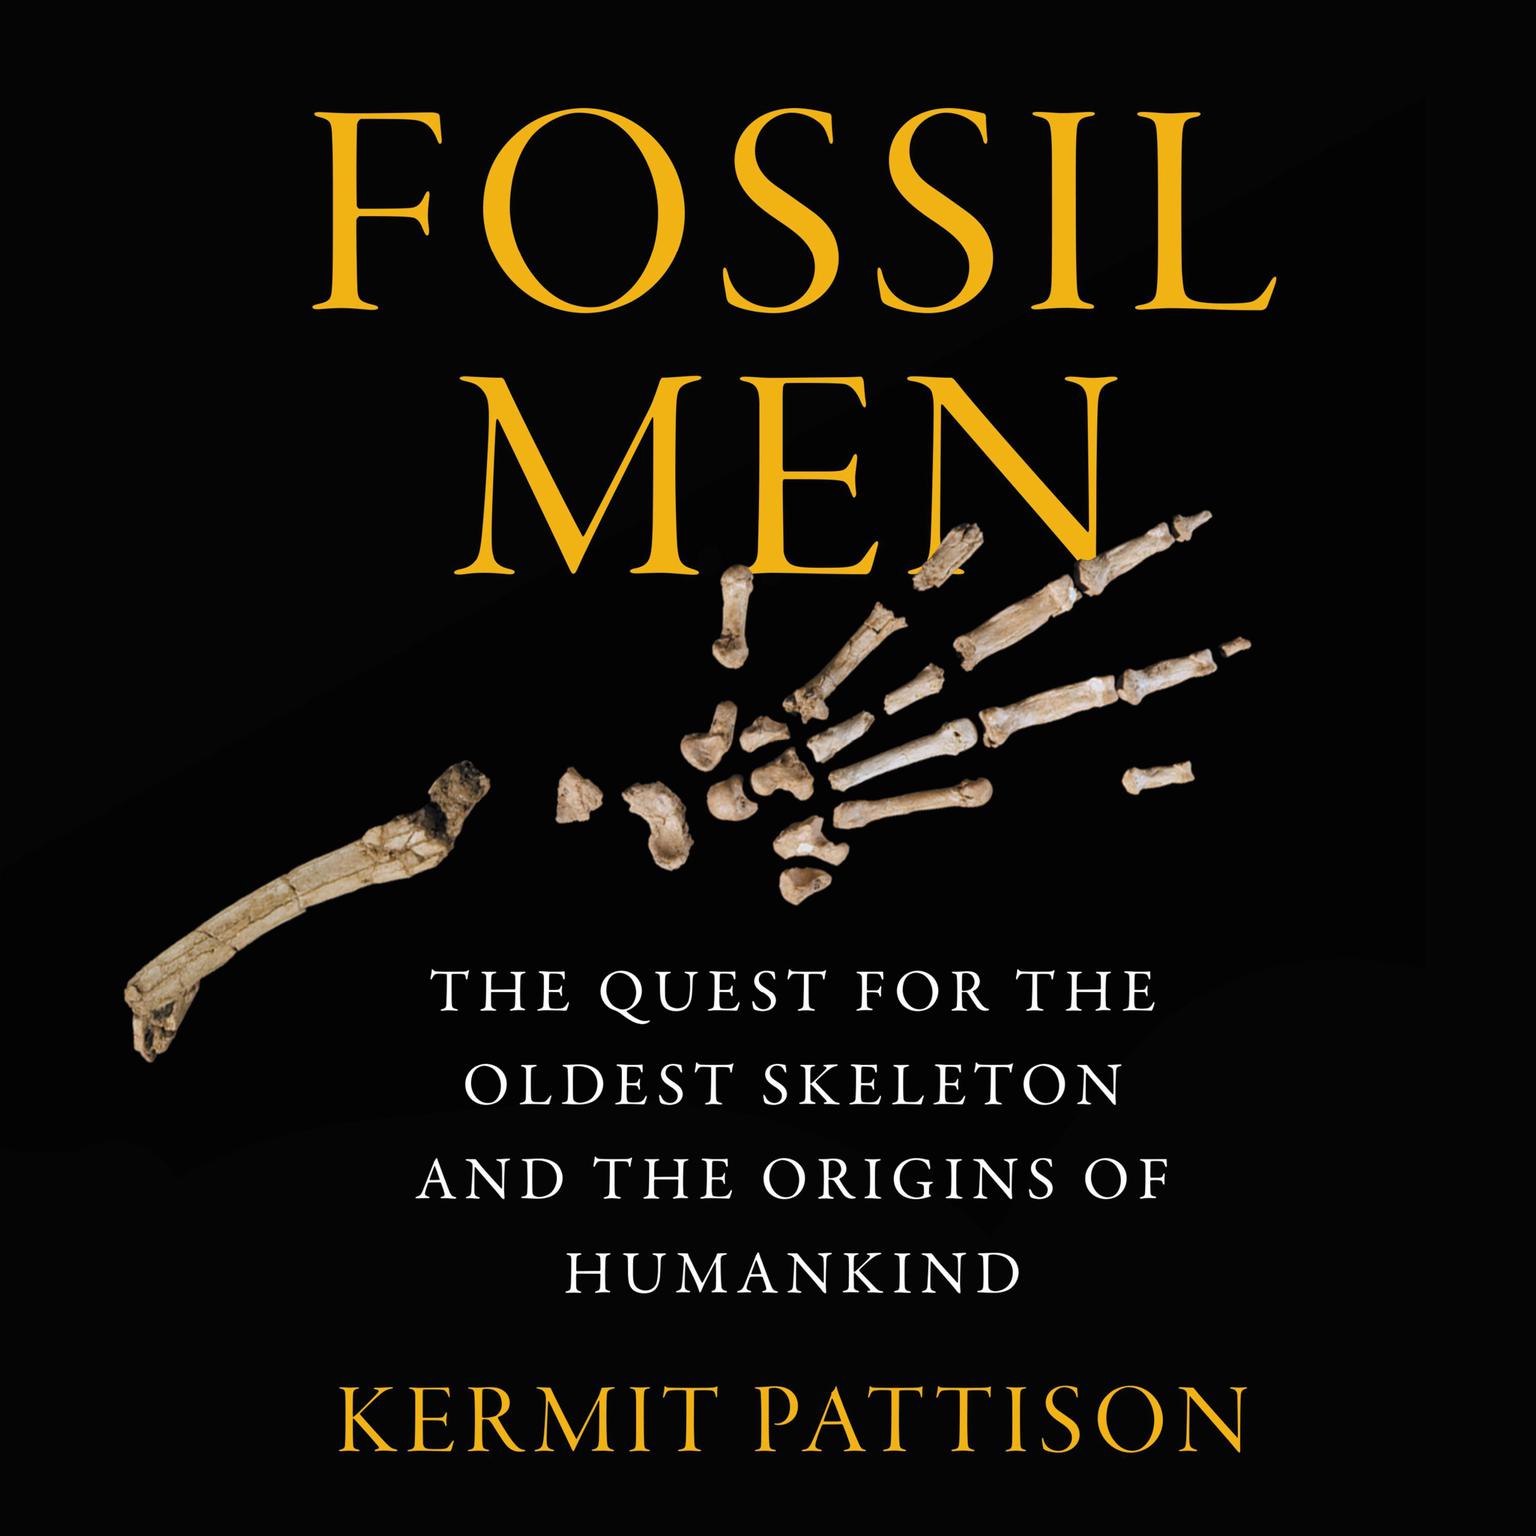 Fossil Men: The Quest for the Oldest Skeleton and the Origins of Humankind Audiobook, by Kermit Pattison